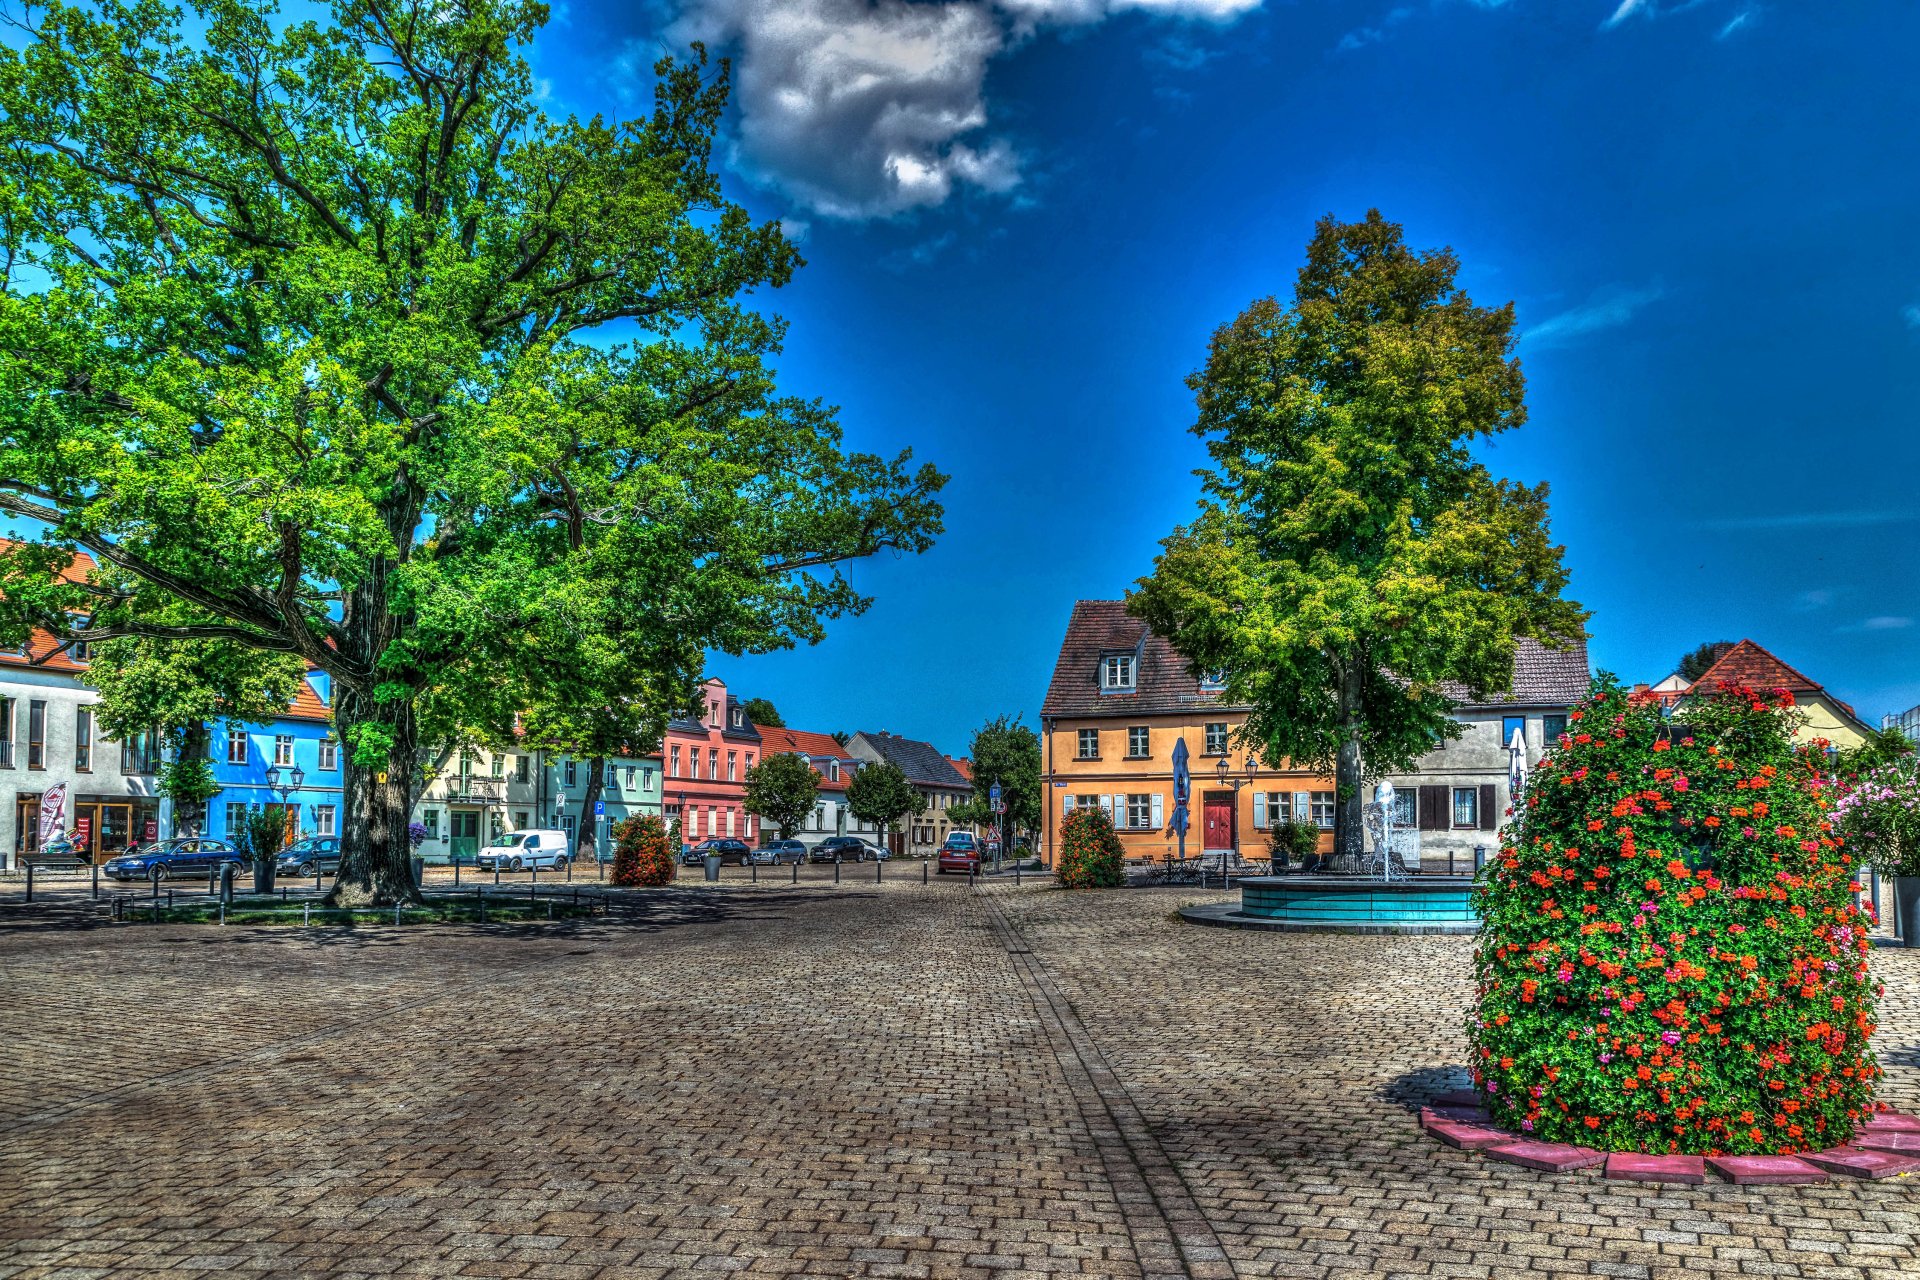 Download Square Tree House Street Town Germany Bradenburg Photography HDR  4k Ultra HD Wallpaper